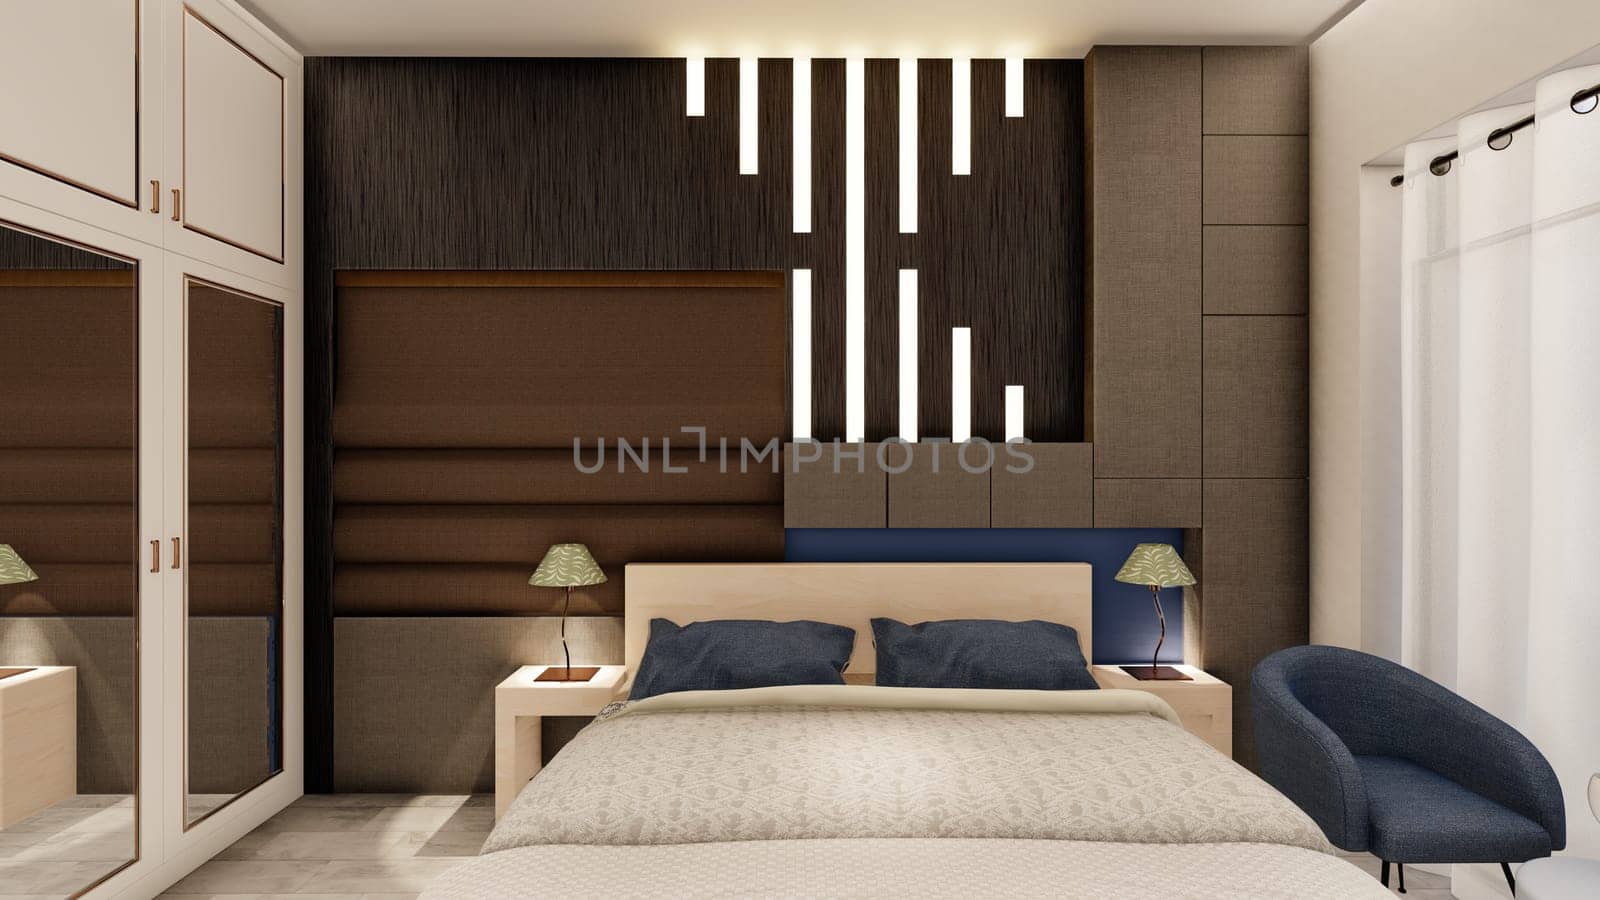 Realistic dark wooden bedroom interior with storage and backlight 3d rendering by shawlinmohd